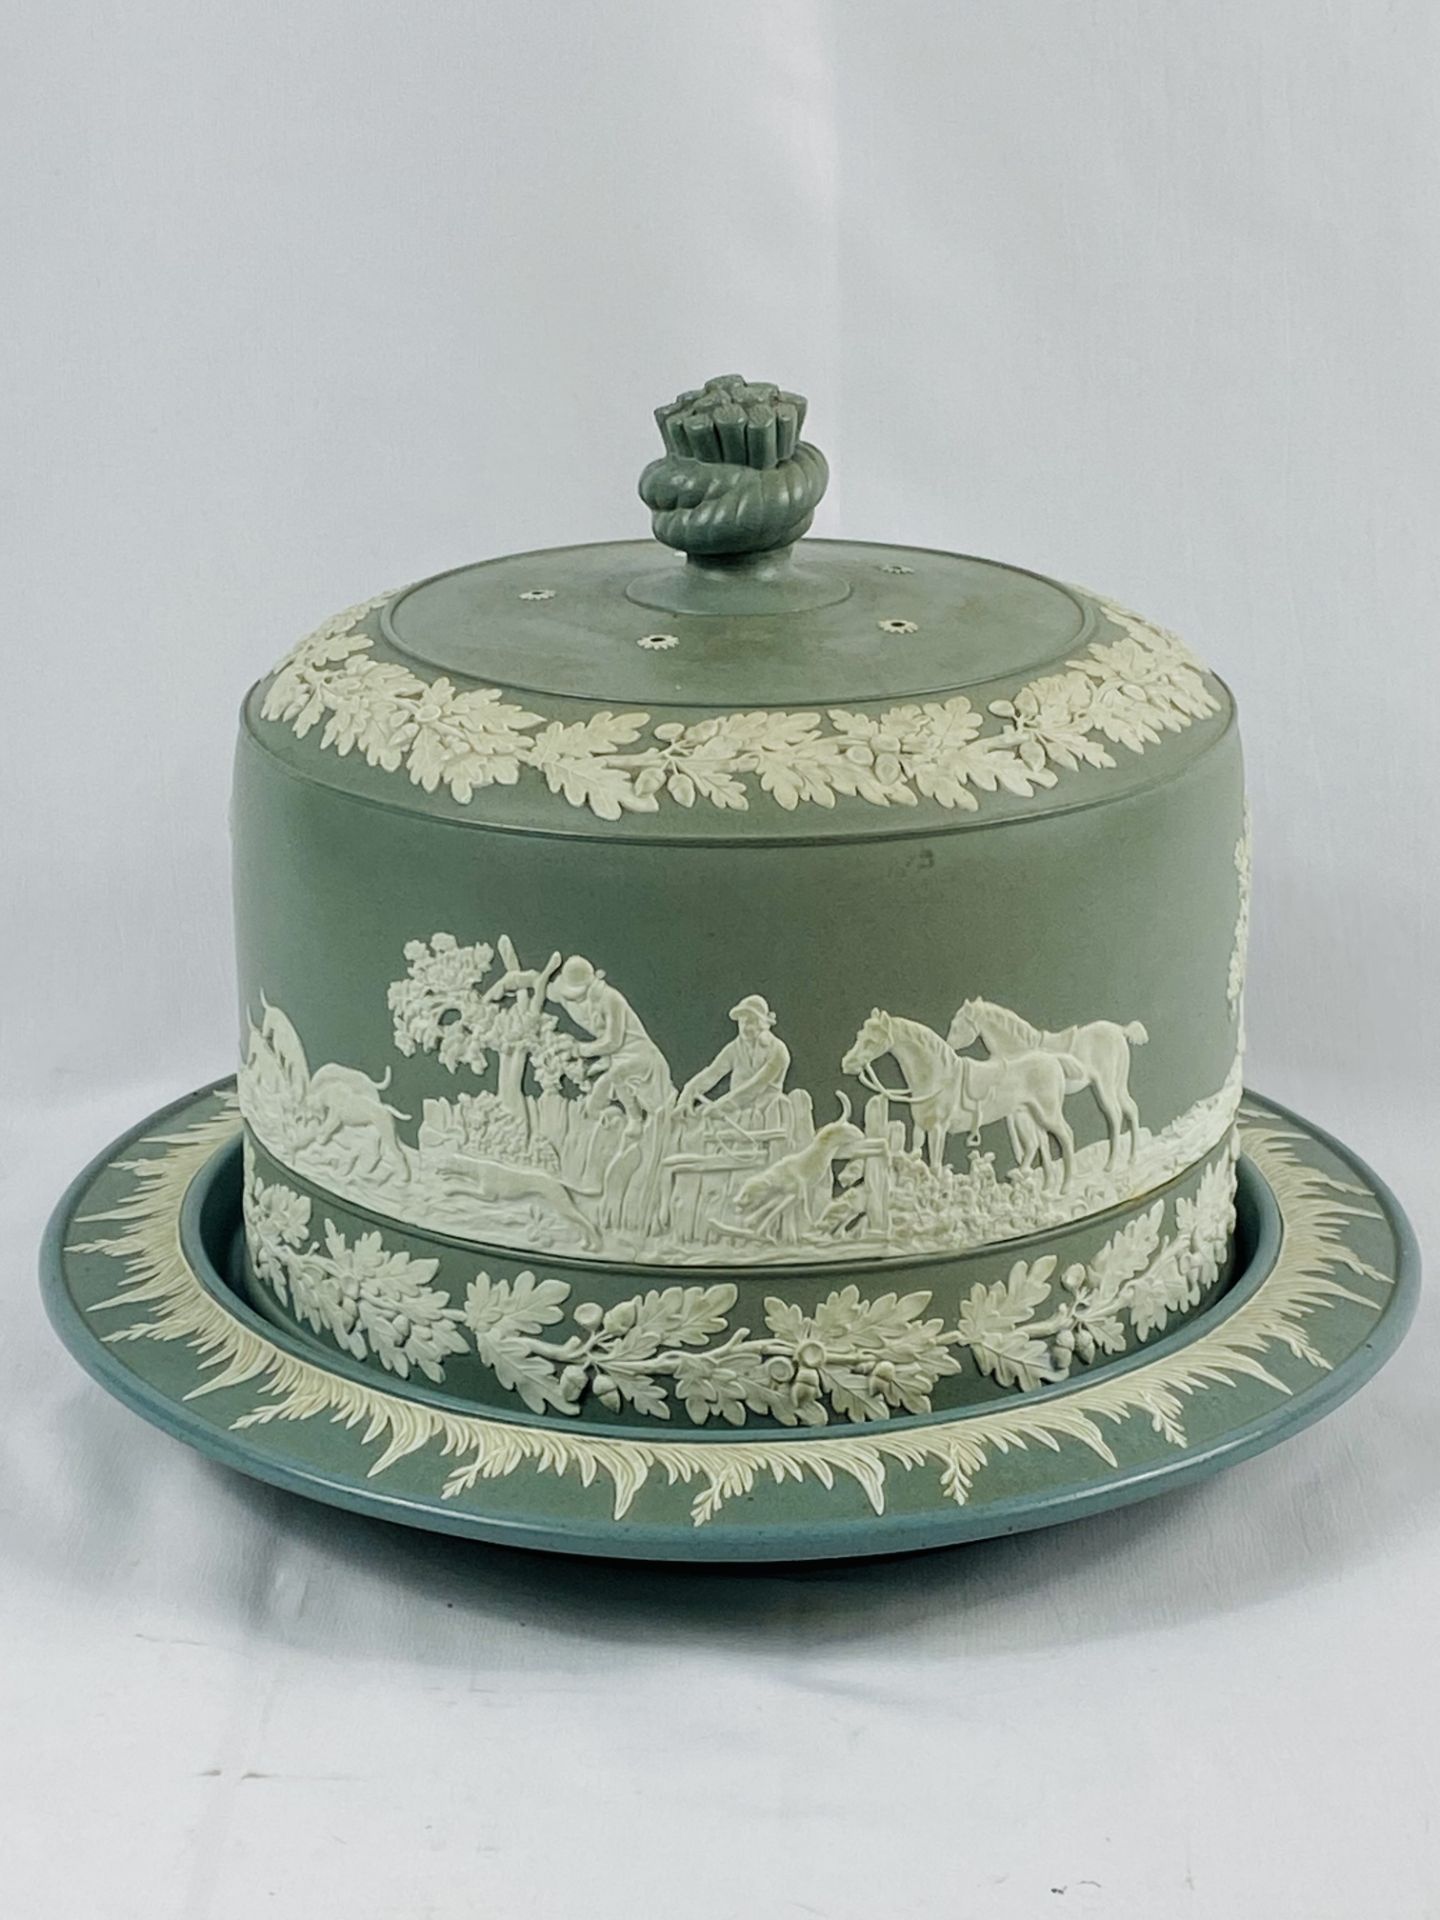 Wedgwood style cheese cloche - Image 7 of 7